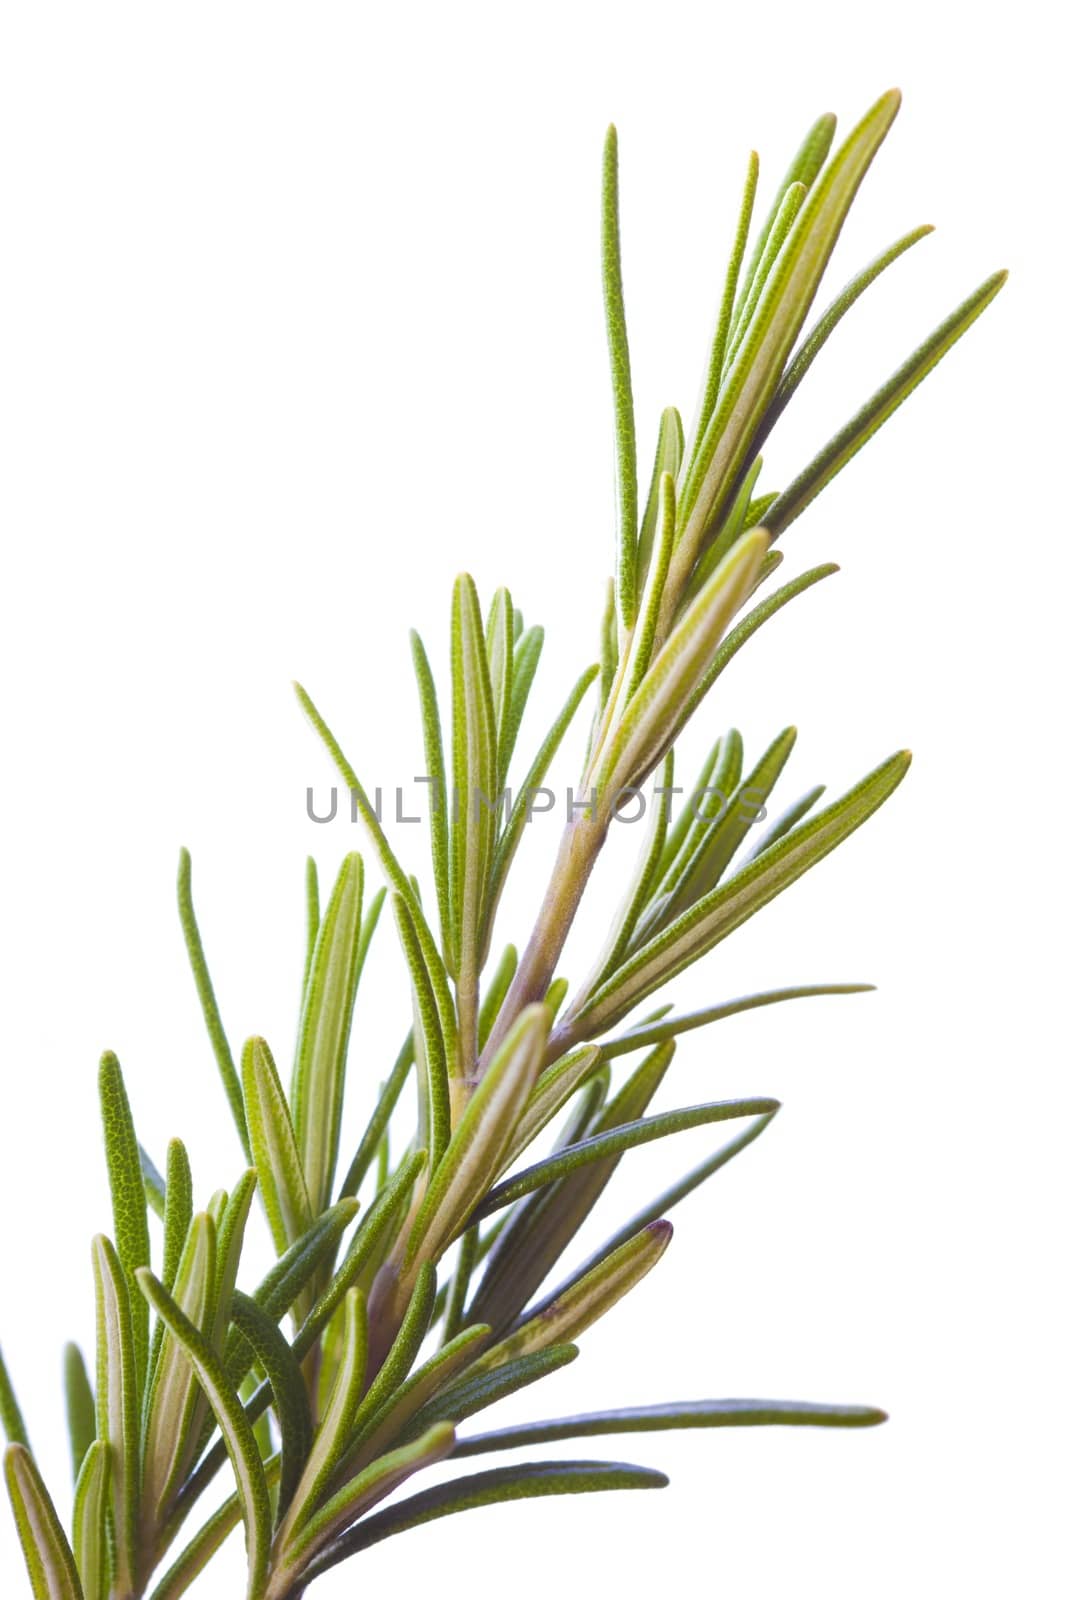 Macro picture of a rosemary branch with white background.